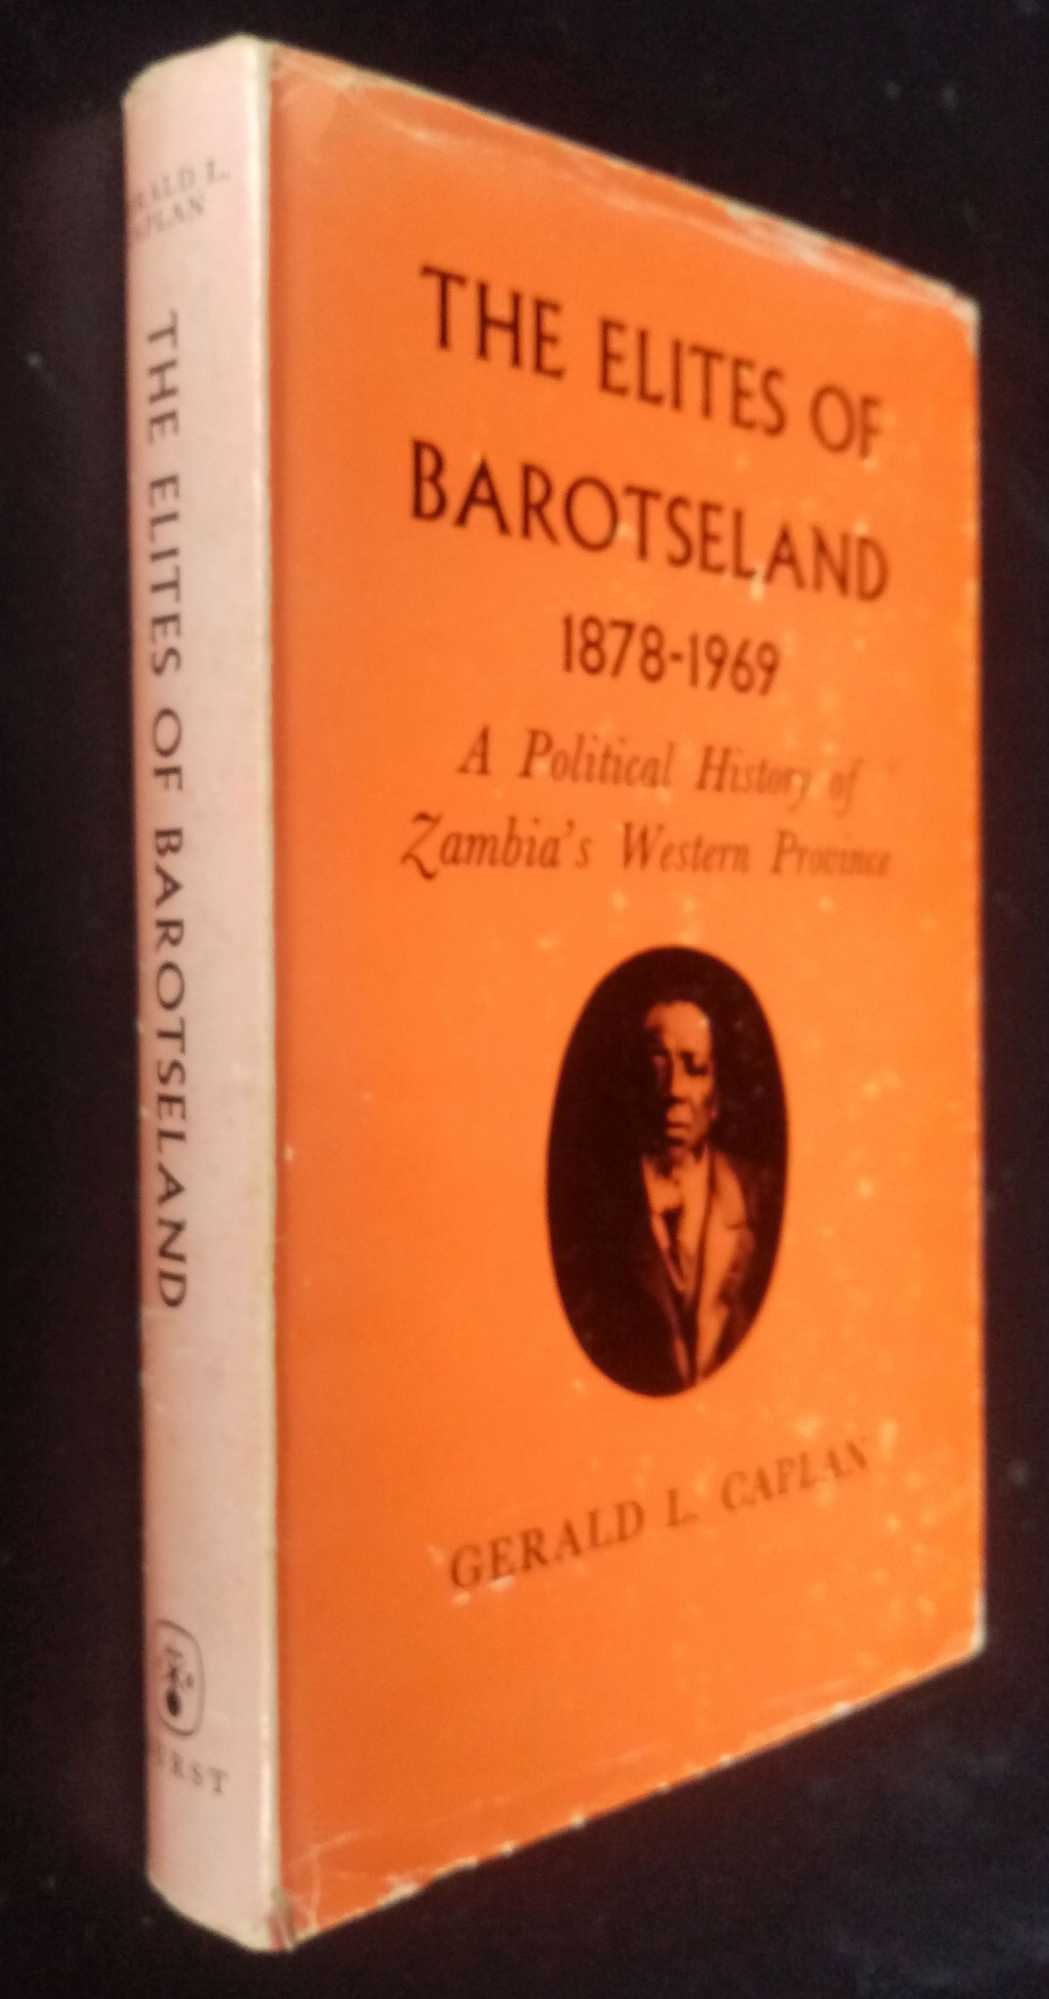 Gerald Caplan - The Elites of Barotseland, 1878-1969: A Political History of Zambia's Western Province